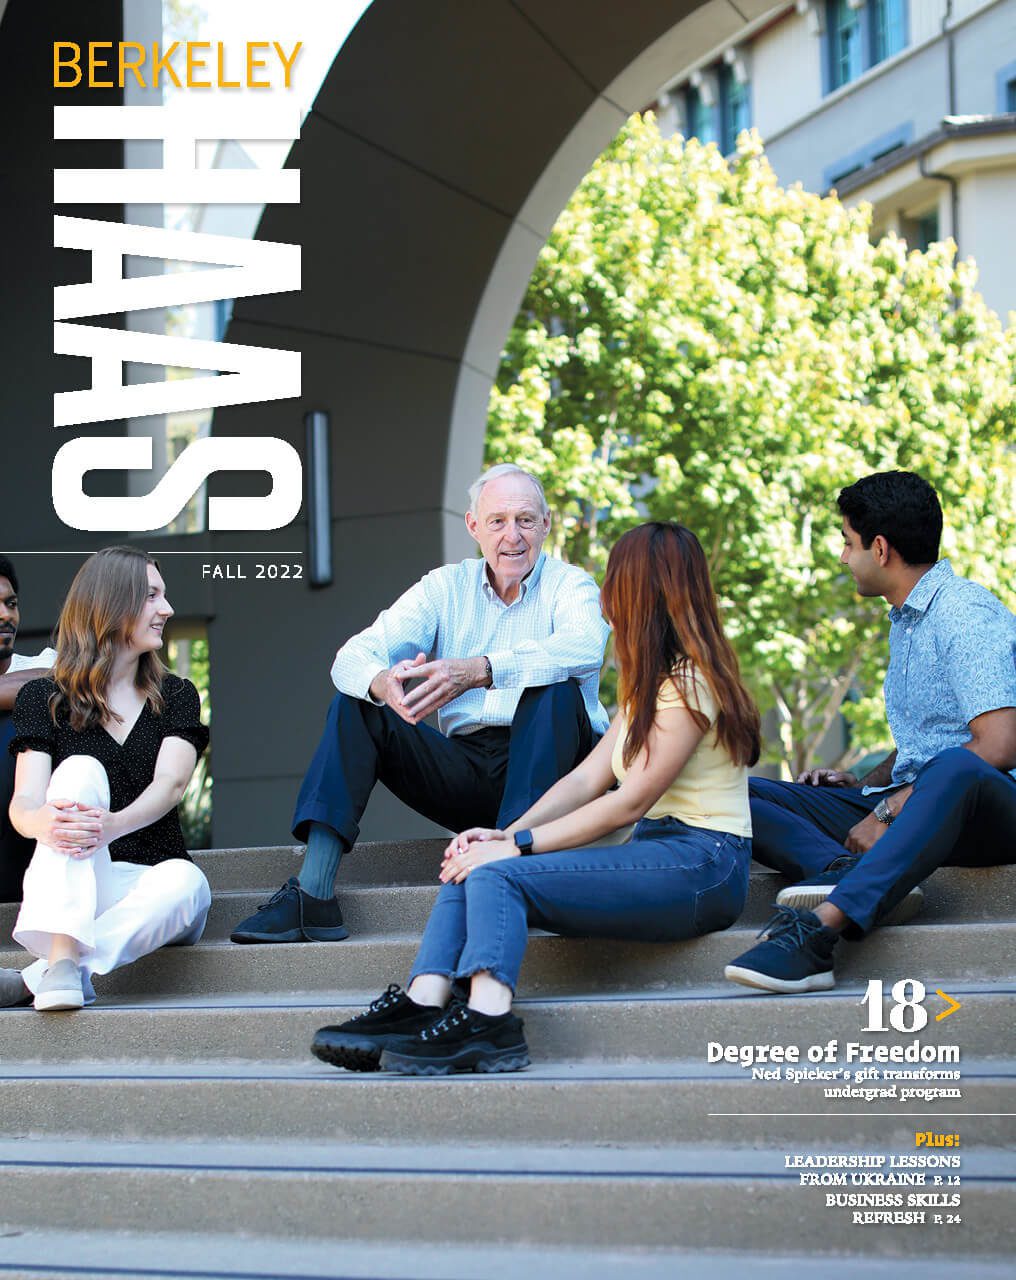 Cover of the fall 2022 issue of Berkeley Haas magazine showing three students sitting around an older man.